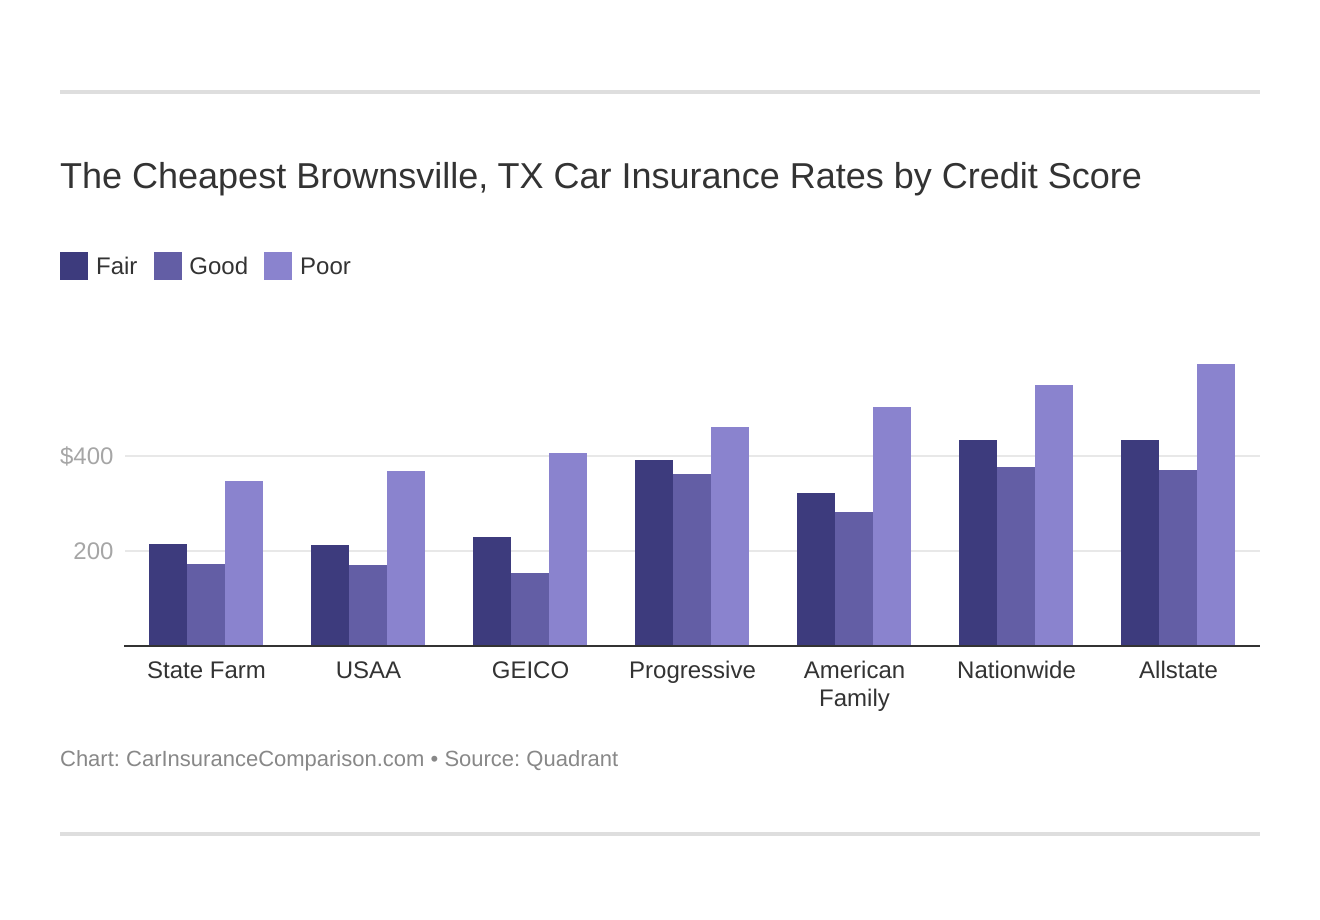 The Cheapest Brownsville, TX Car Insurance Rates by Credit Score